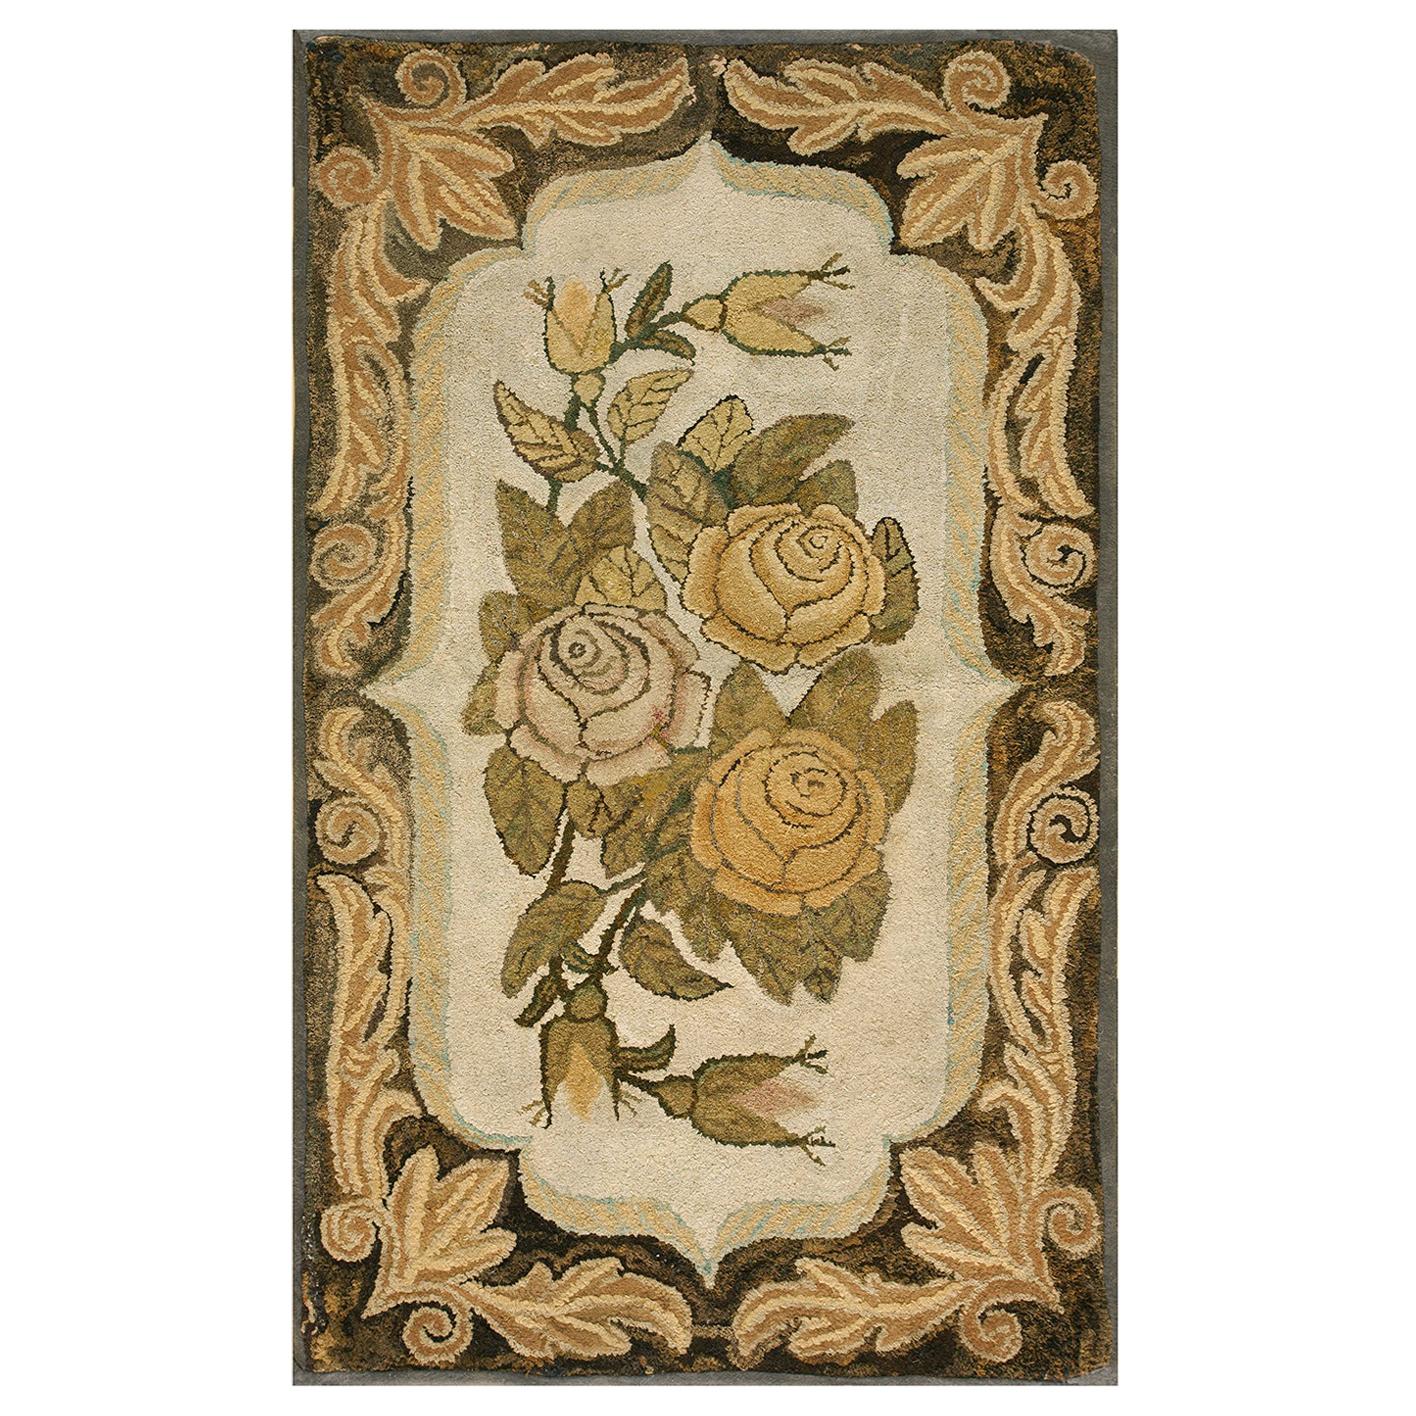 Antique American Hooked Rug 2' 7" x 4' 8" For Sale